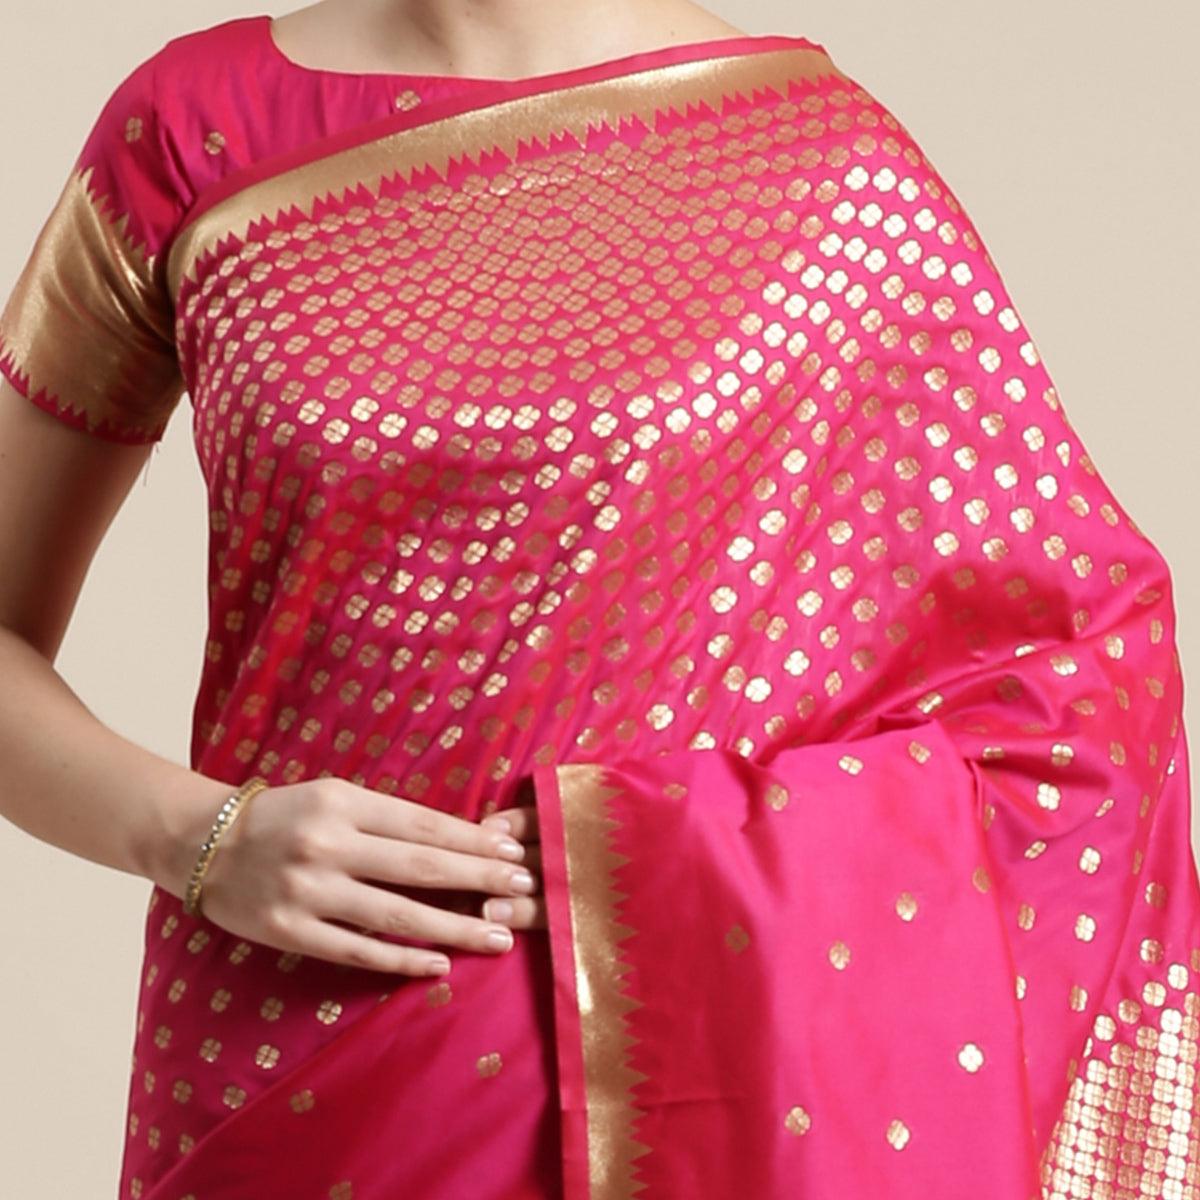 Adorable Pink Colored Festive Wear Silk Blend Woven Geometric Saree With Tassels - Peachmode